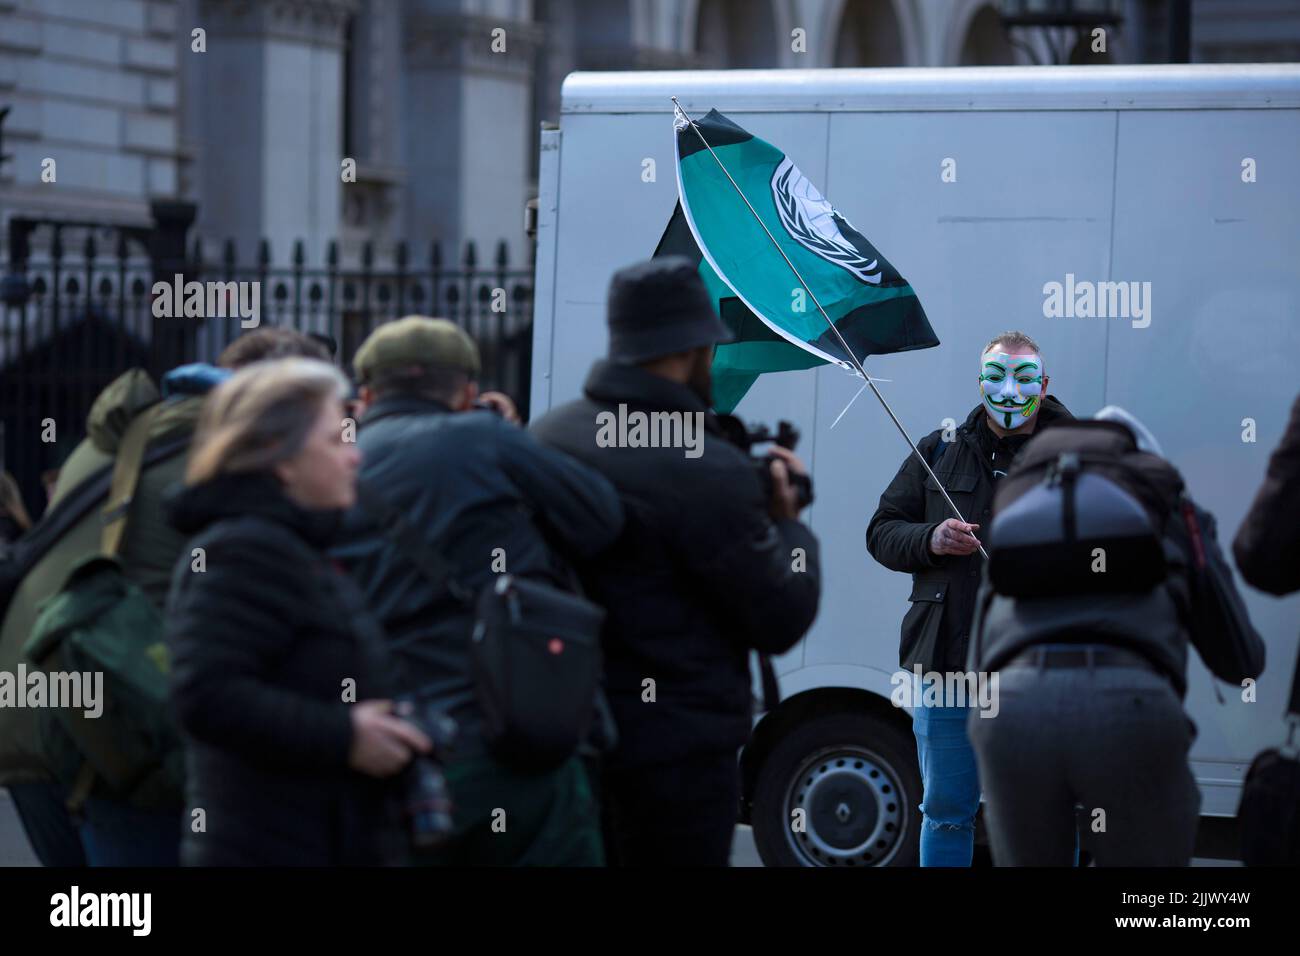 A person wearing a mask stands near the gates to Downing Street during a Cost of Living Crisis protest organised by the People’s Assembly in London. Stock Photo